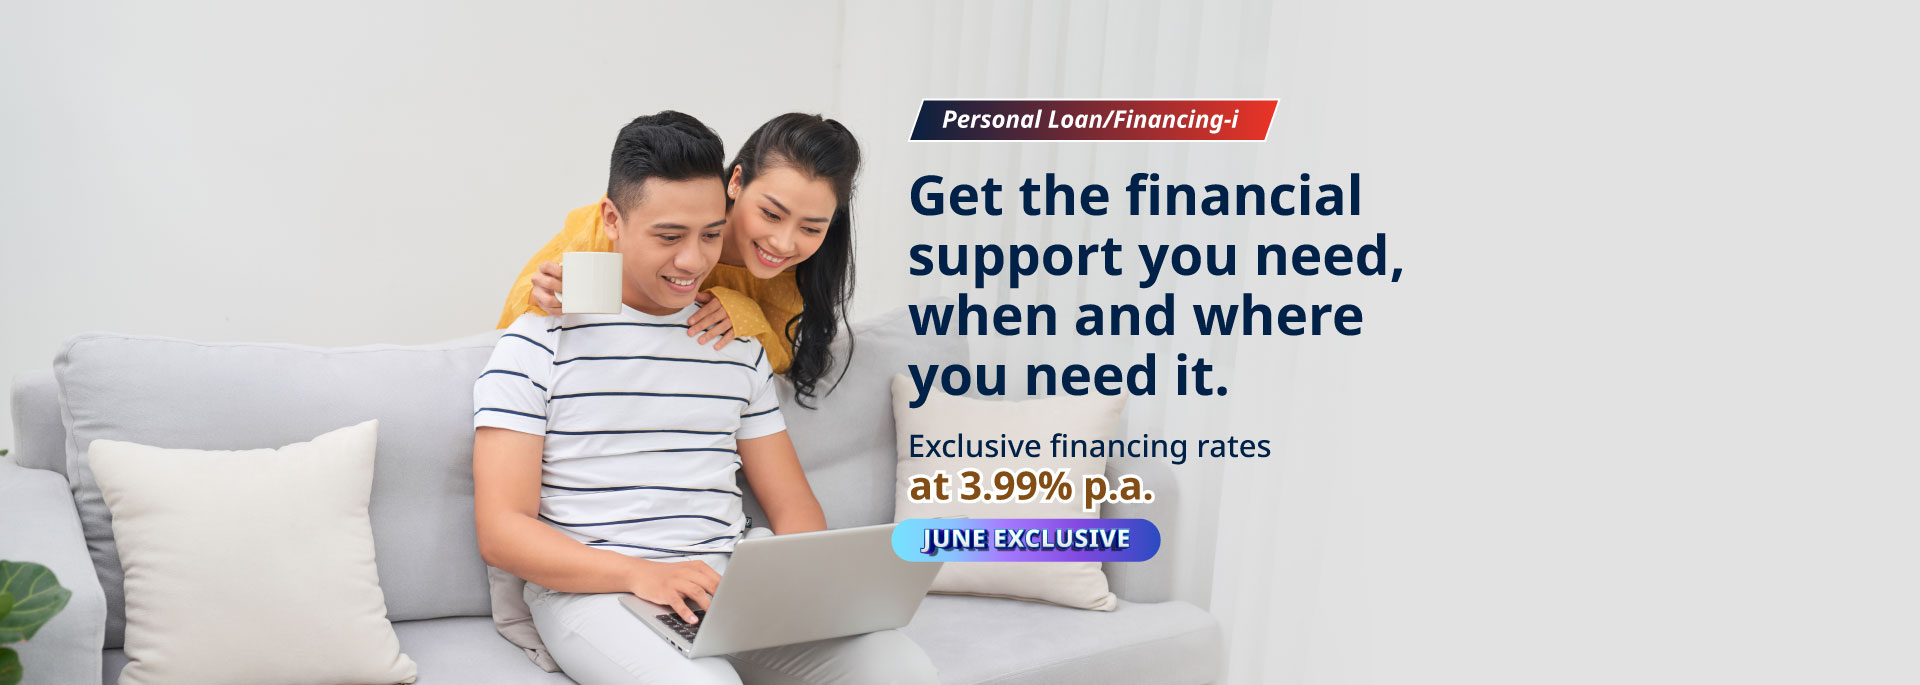 Personal Loan/Financing-i June Special Connect Offer